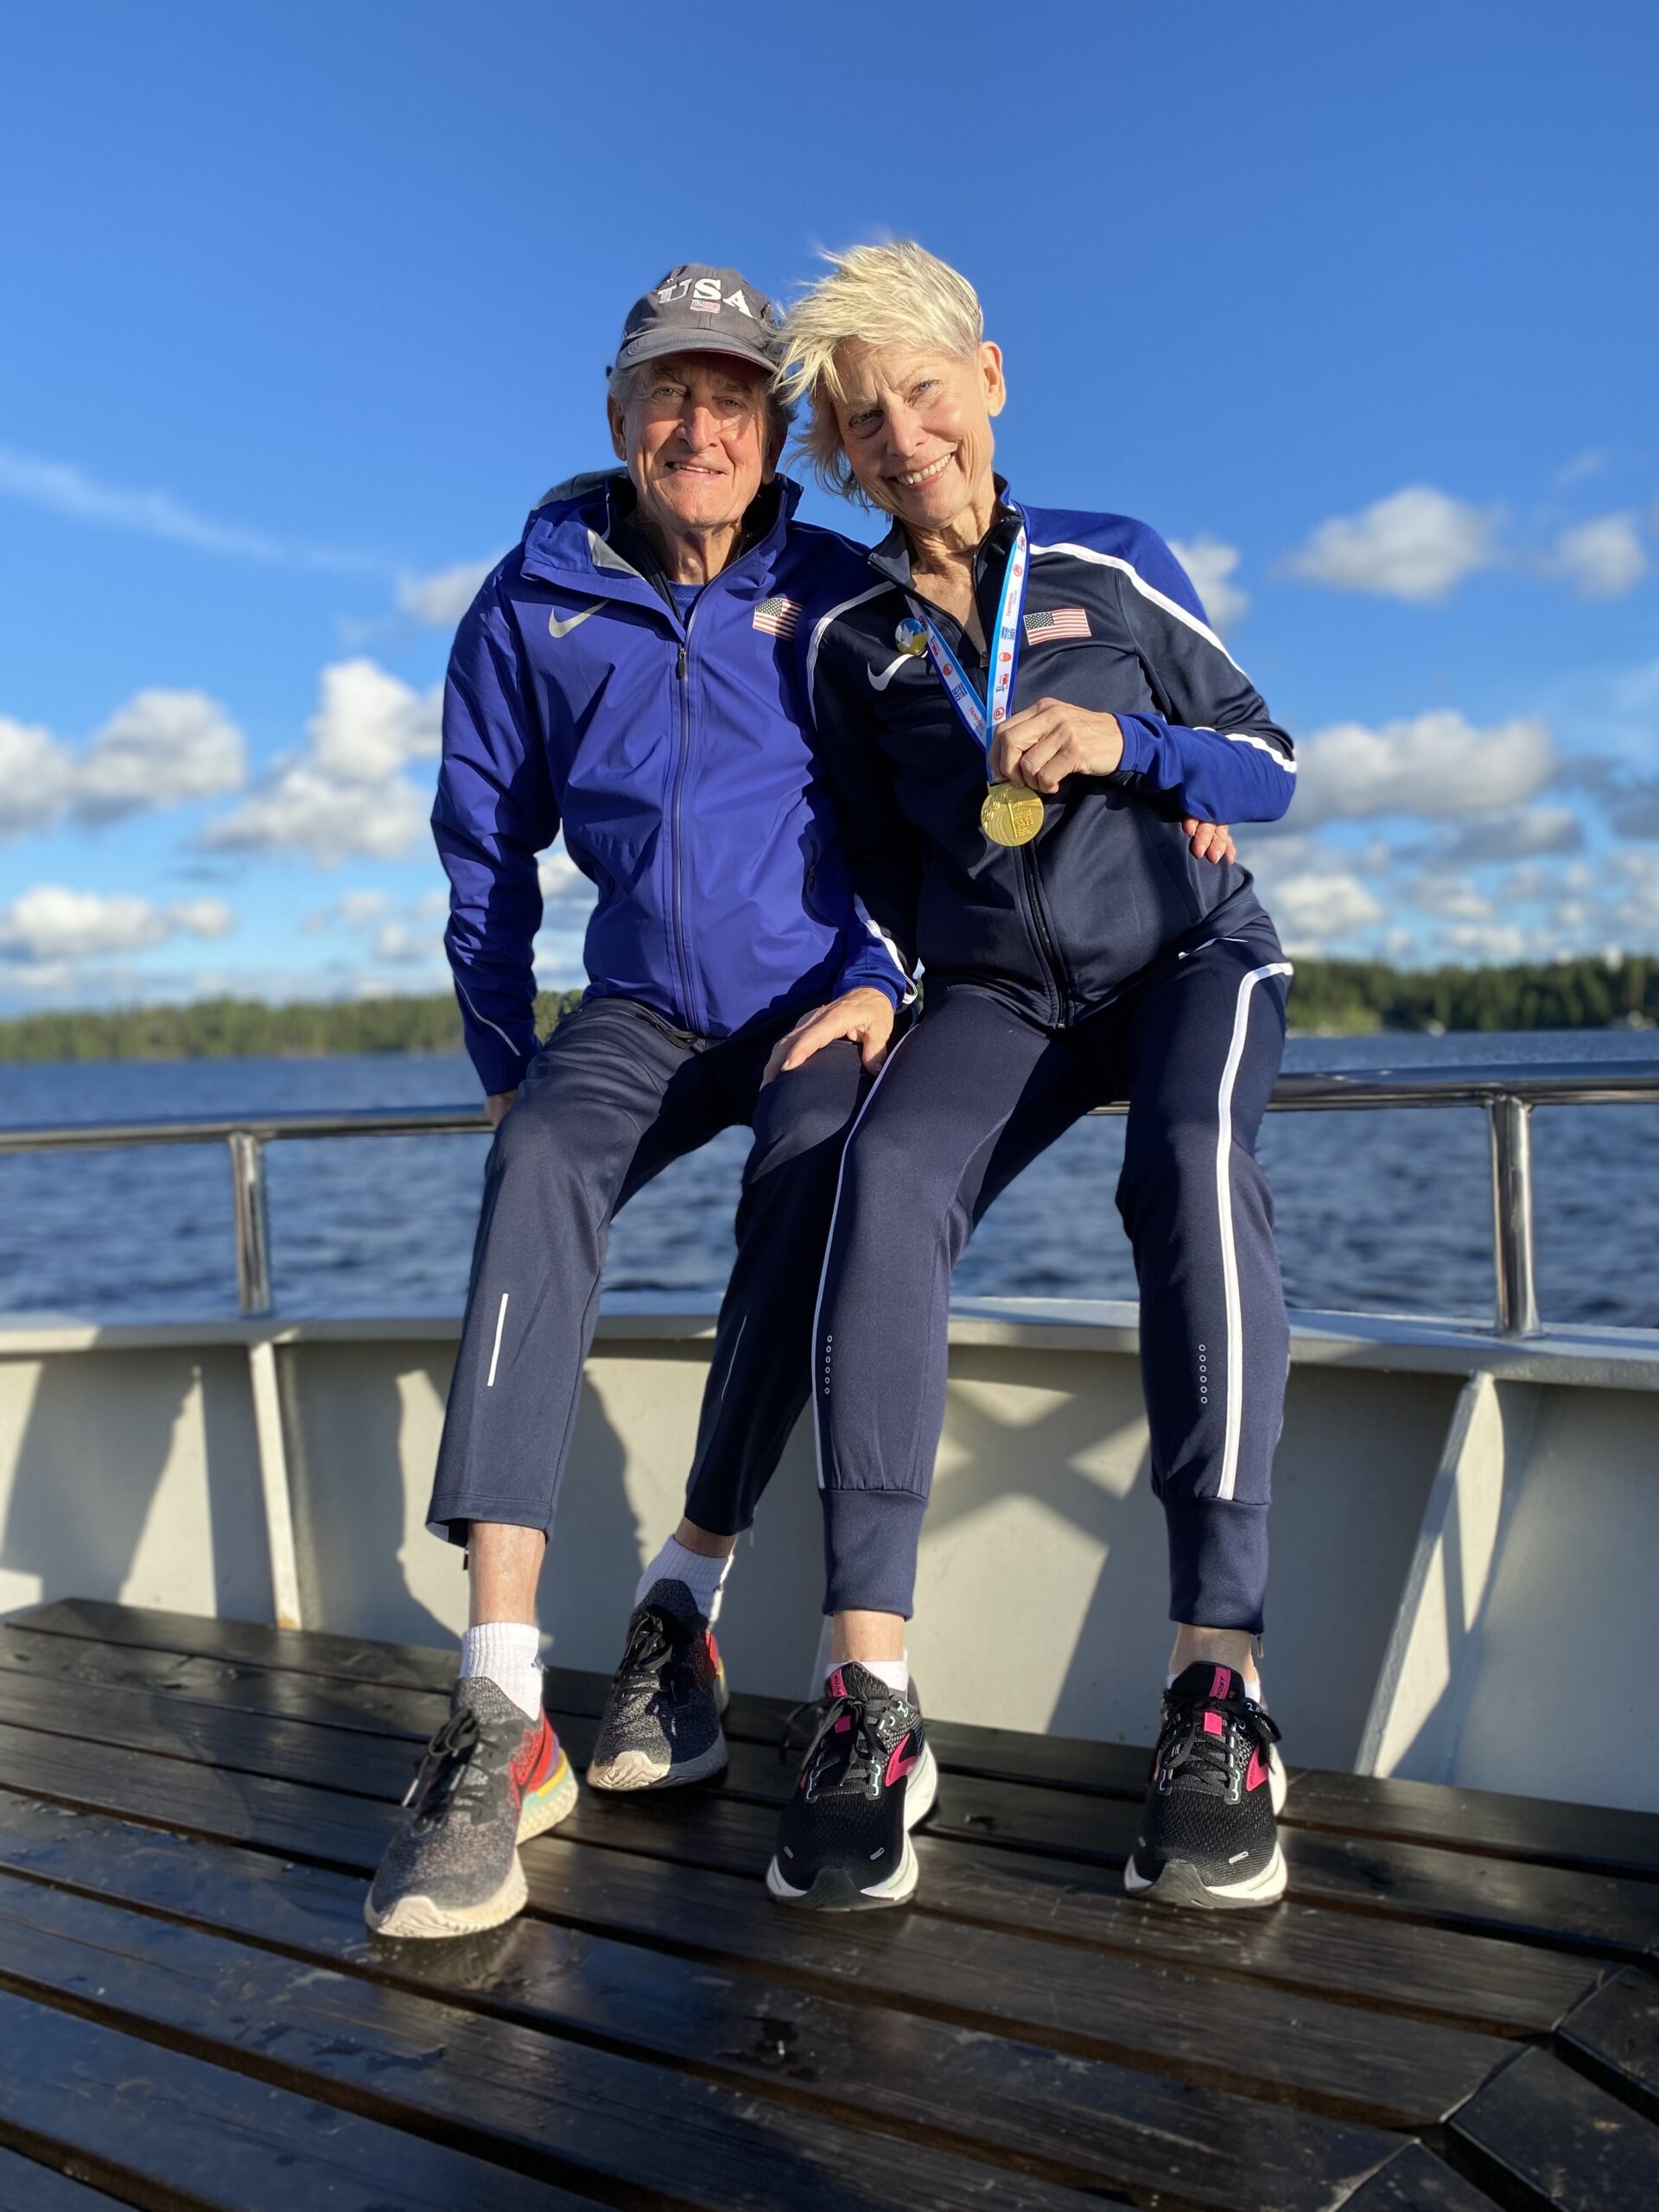 Dan and Joy Flynn on a boat trip in Finland. They have traveled the world, competing in Masters Track and Field events.